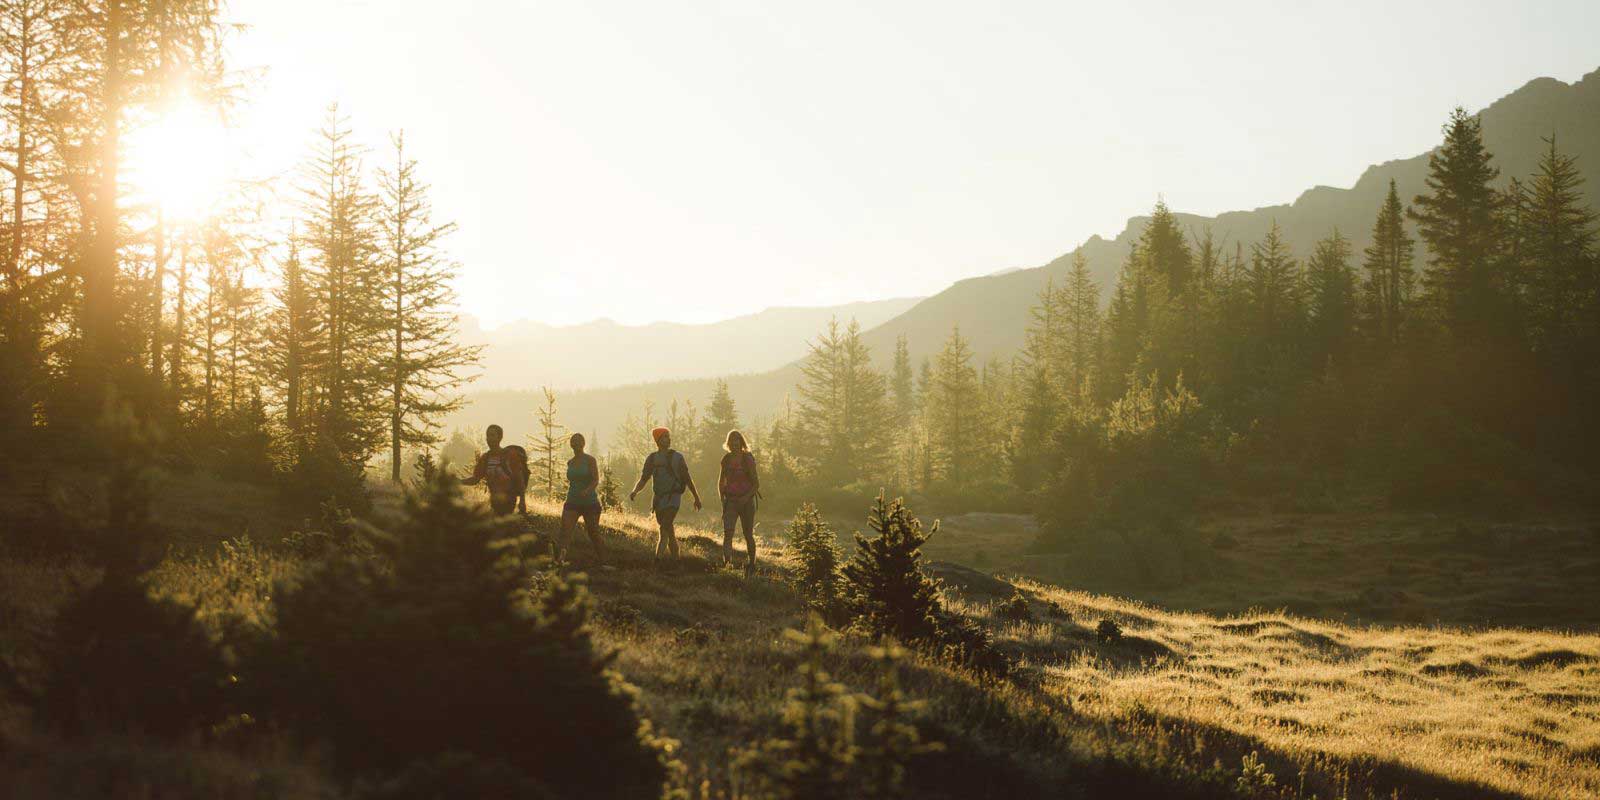 Group of hikers in an evergreen forest near Belt, Monana